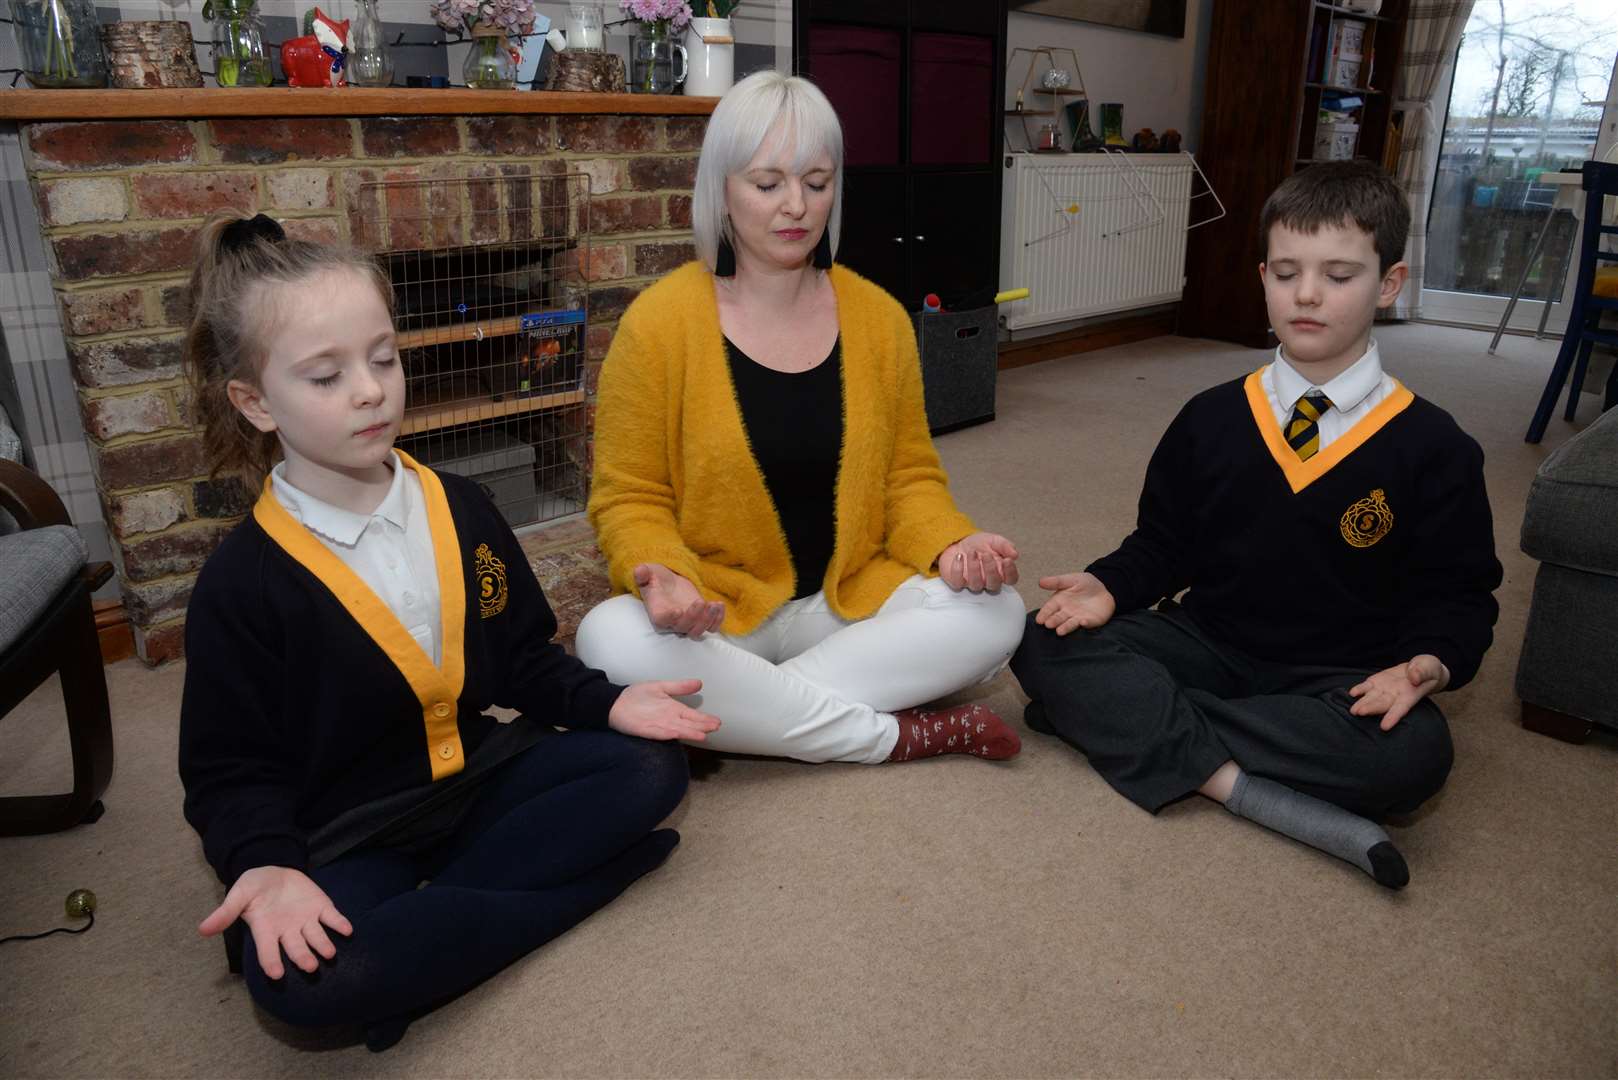 Claire MacGillivray of Staplehurst and her children Freya, seven and Aiden McBean, nine. Claire wants schools to introduce meditation in the mornings. Picture: Chris Davey. (6772505)